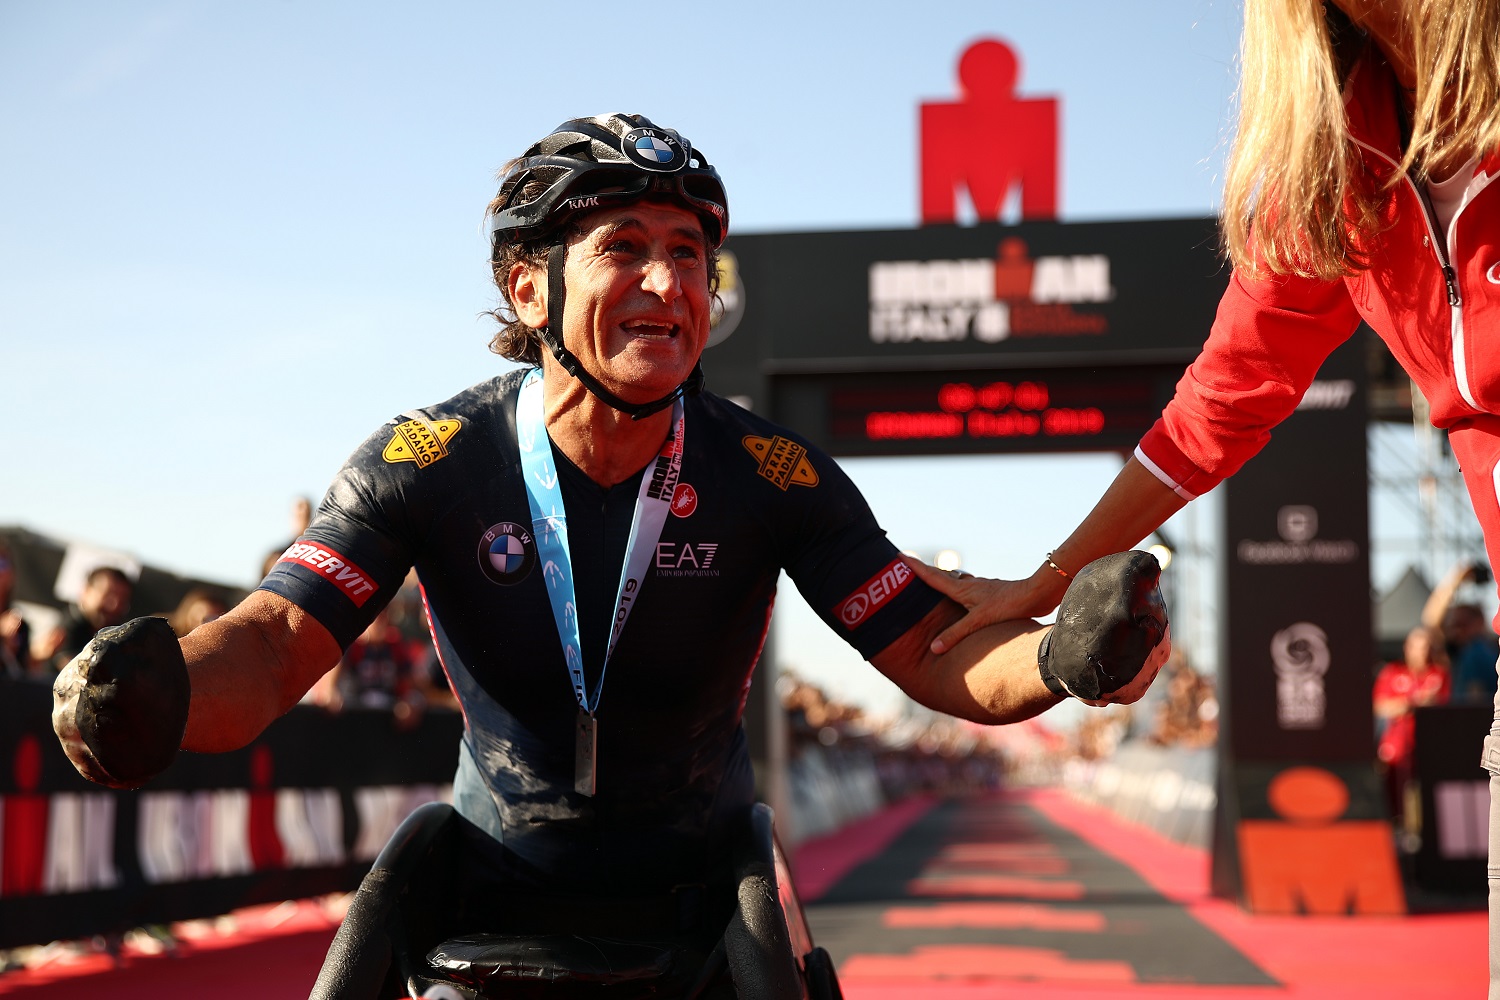 Alex Zanardi of Italy celebrates finishing  Ironman Italy on Sept. 21, 2019, in Cervia, Italy. | Bryn Lennon/Getty Images for Ironman